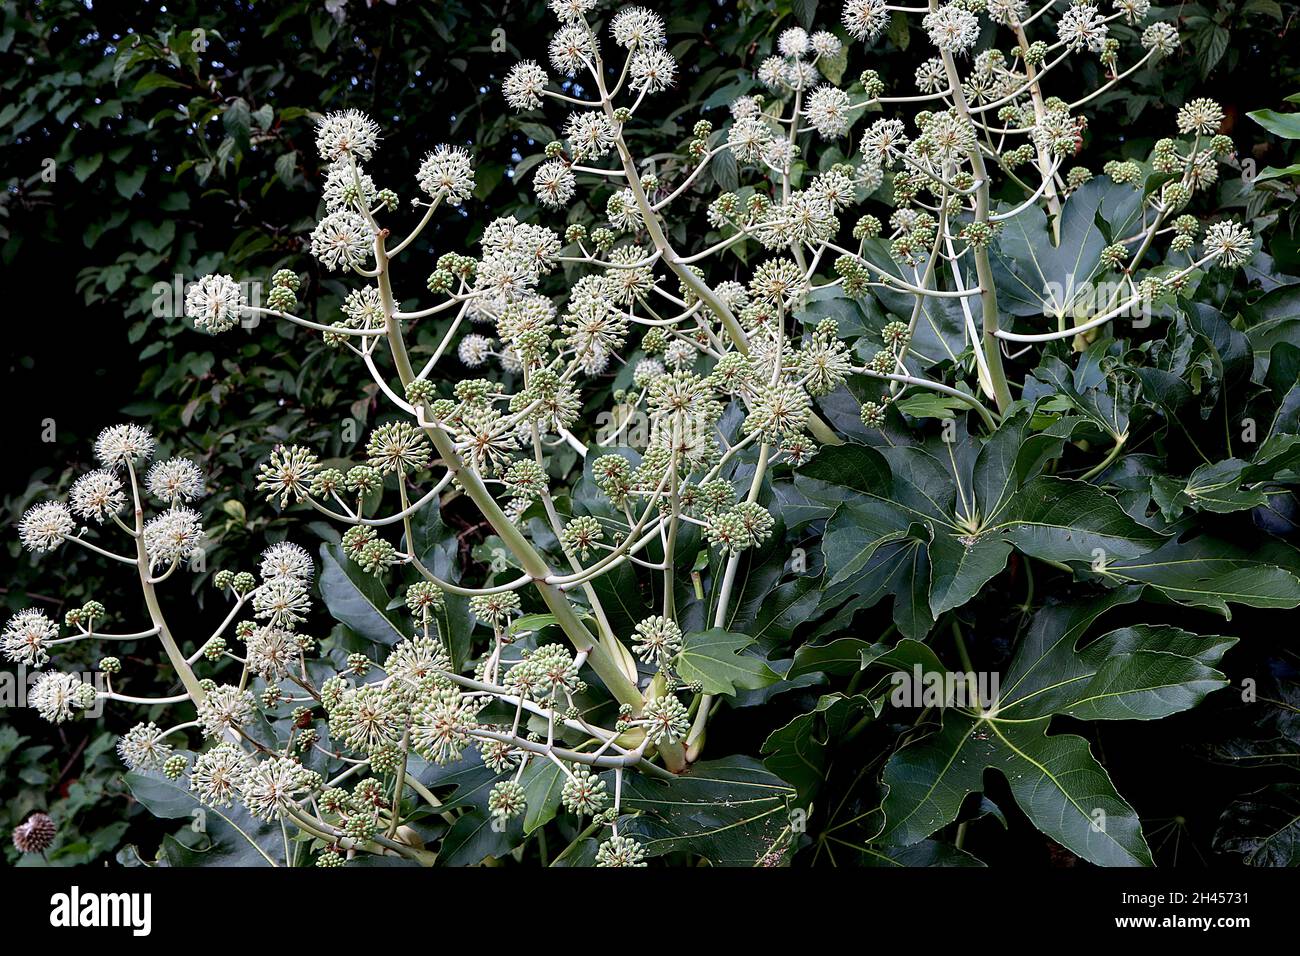 Fatsia japonica Caster oil plant or Paper plant – spherical umbels of tiny white flowers and large dark green glossy leaves,  October, England, UK Stock Photo